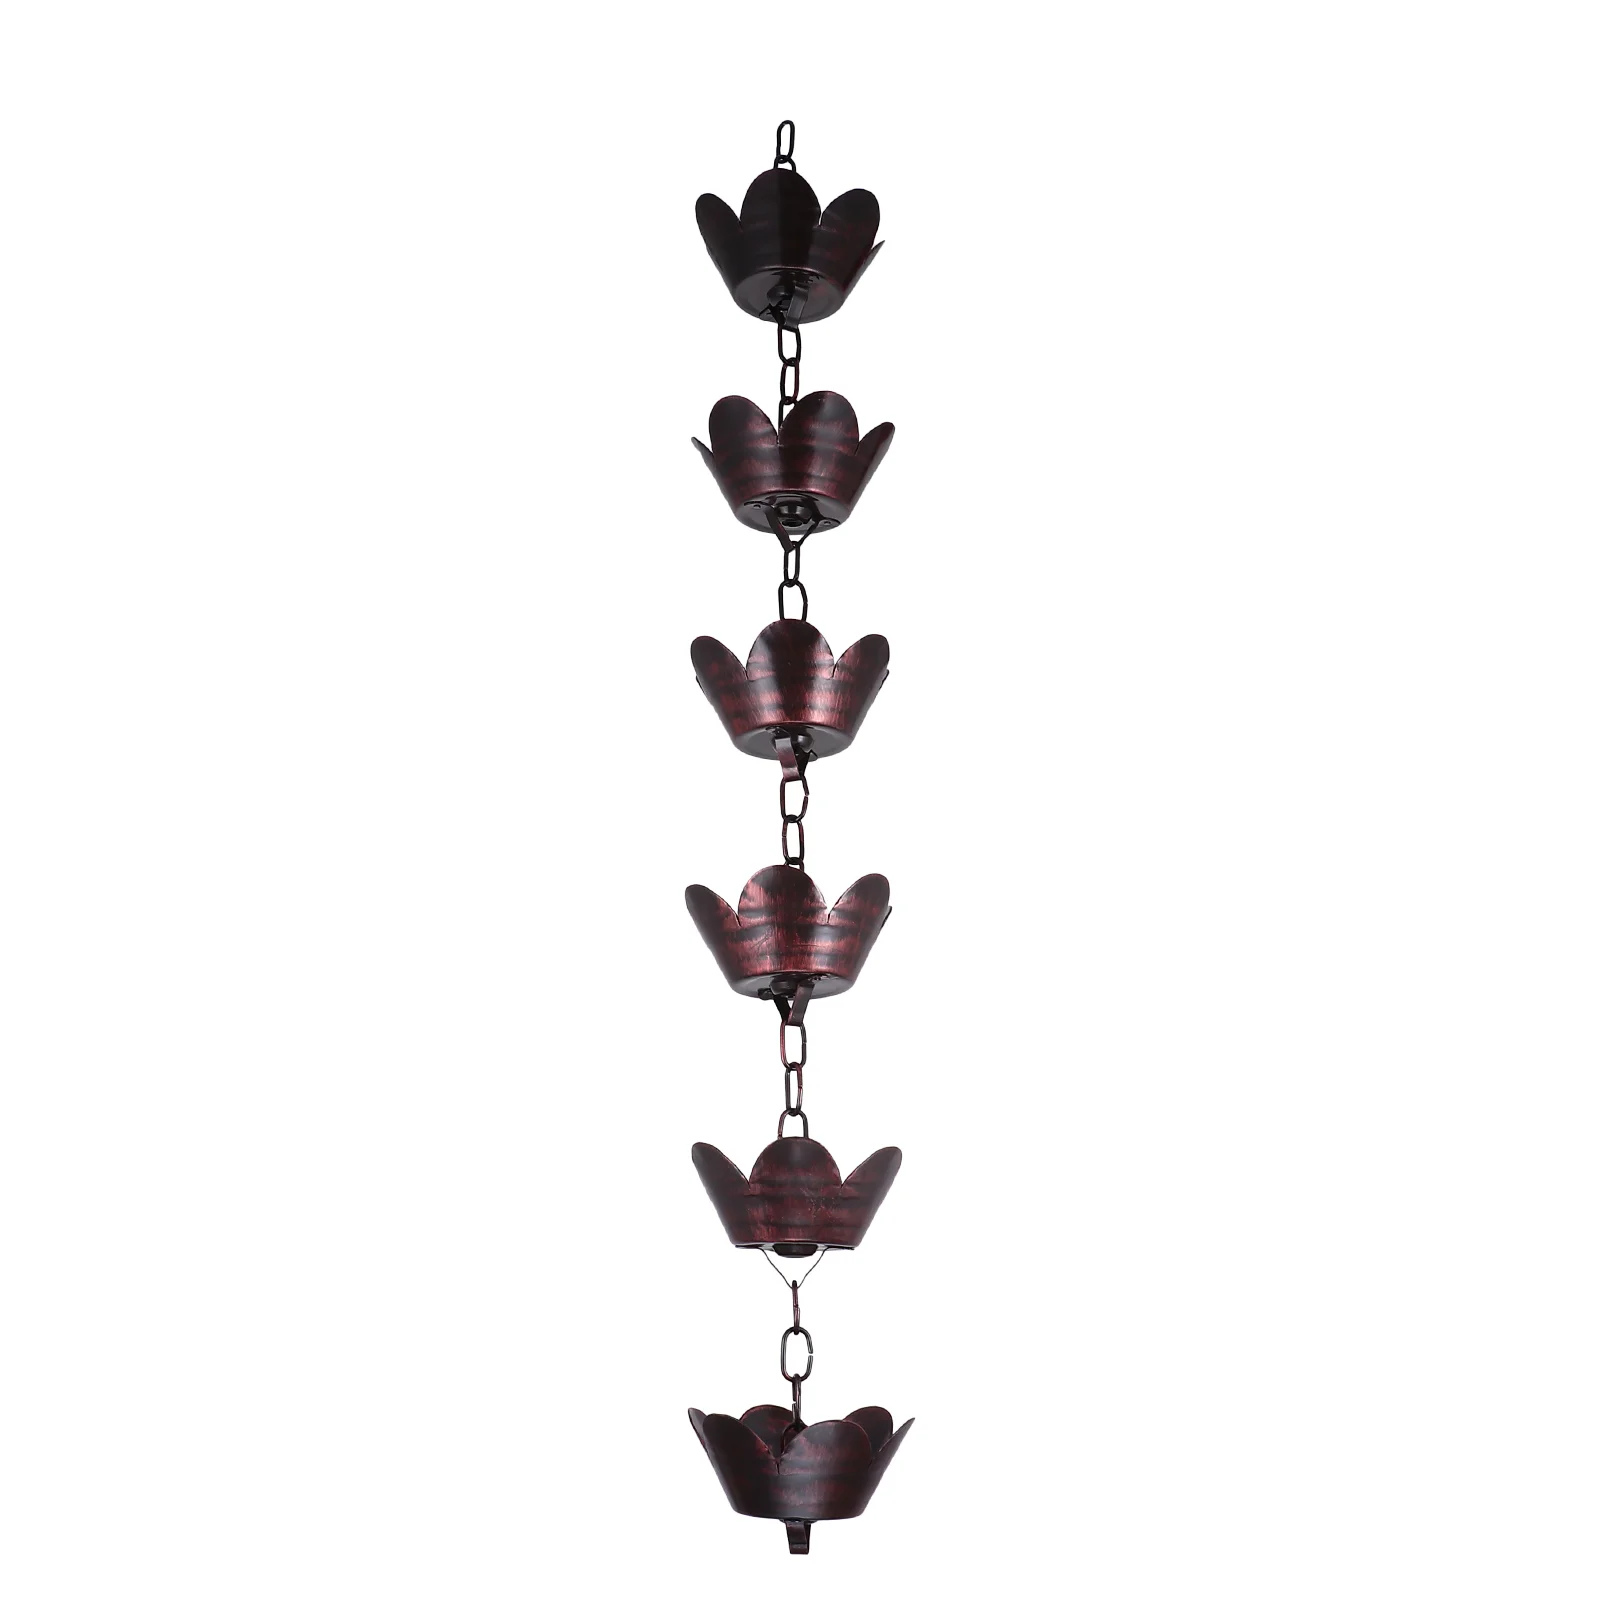 Rain Chain Gutter Water Chains Downspout Hanging Flower Drain Diverter Bell Chimes Metal Lotus Cup Catcher Rainwater